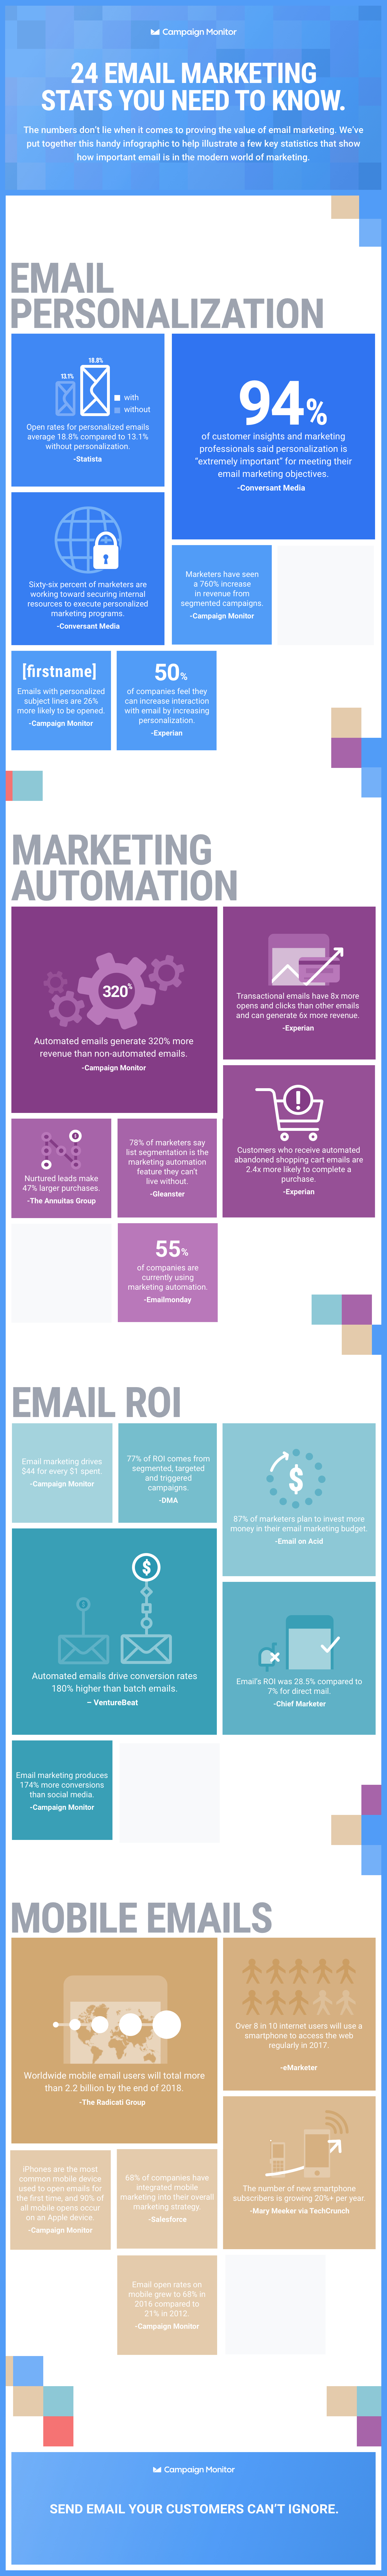  Email Marketing Stats